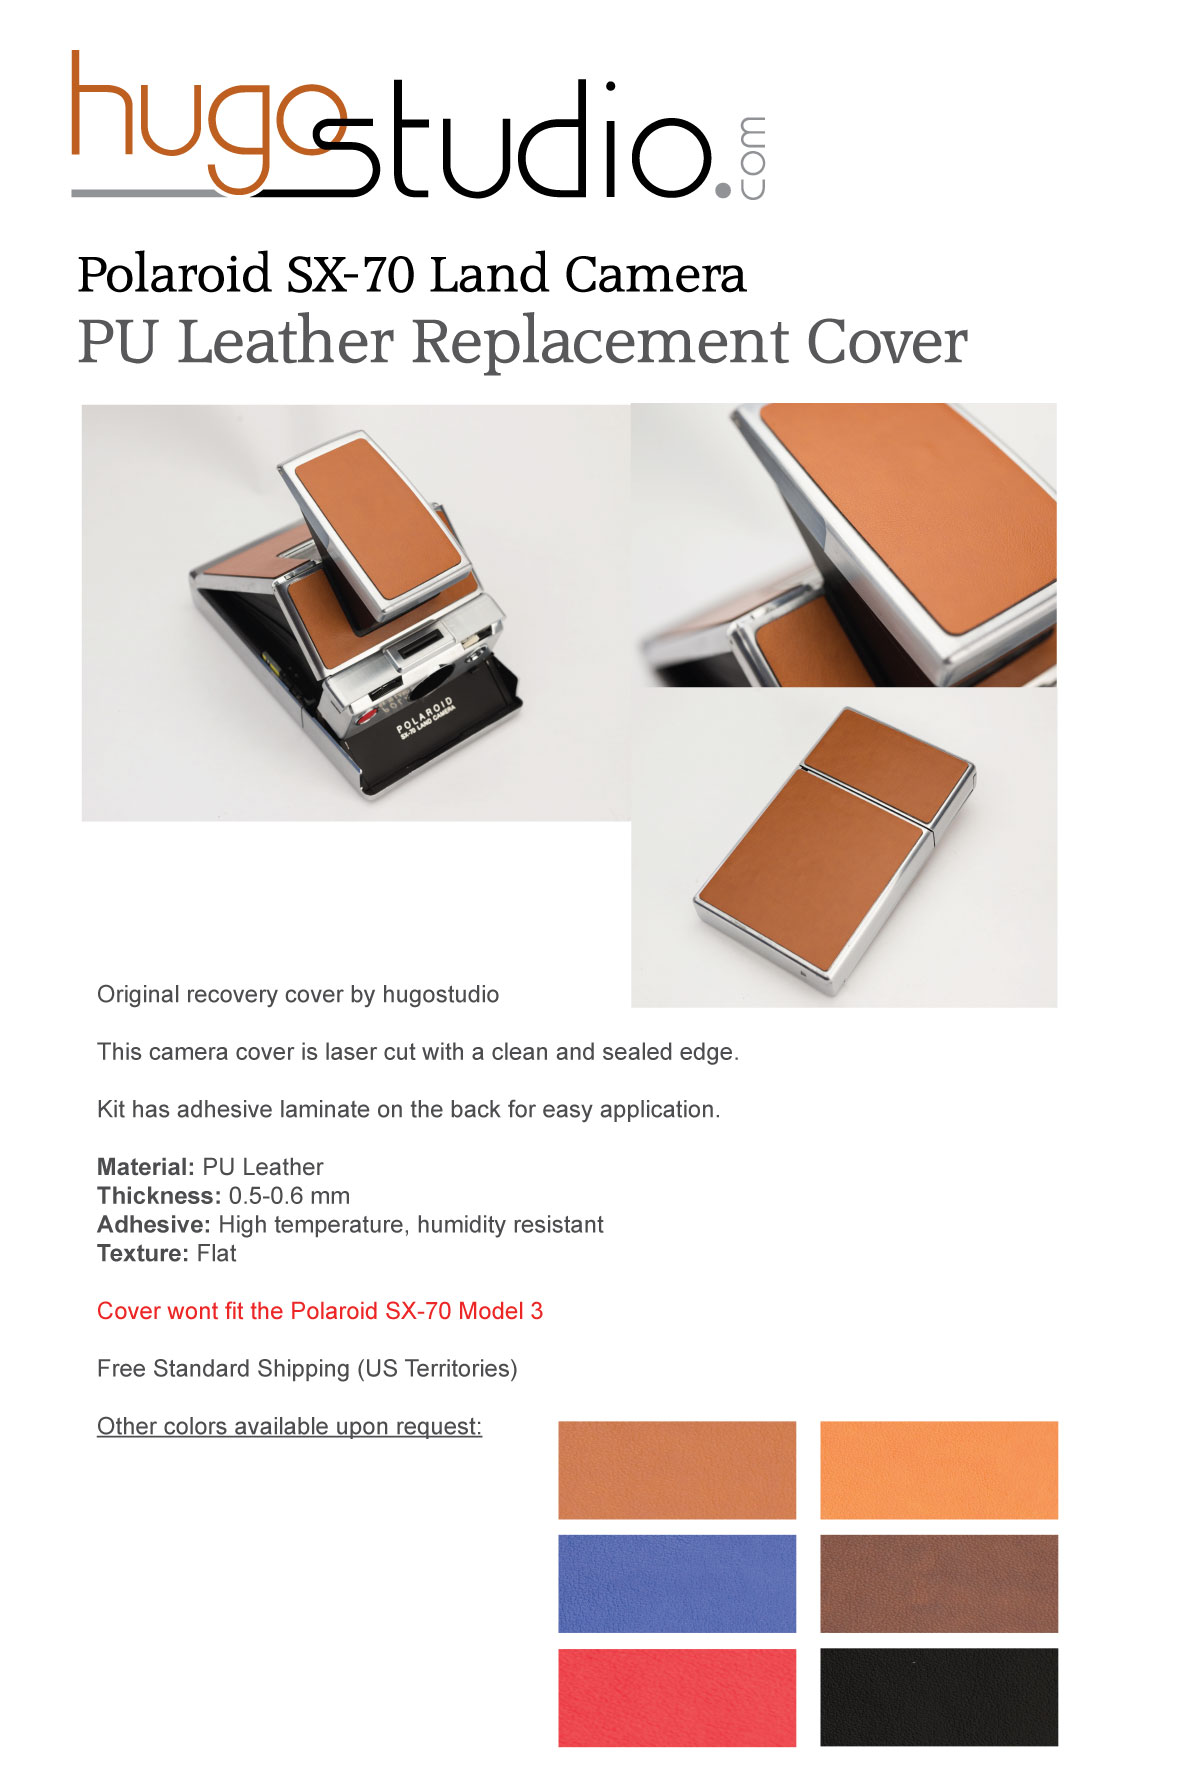 Polaroid SX-70 Land Camera PU Leather Replacement Cover W/ Instructions